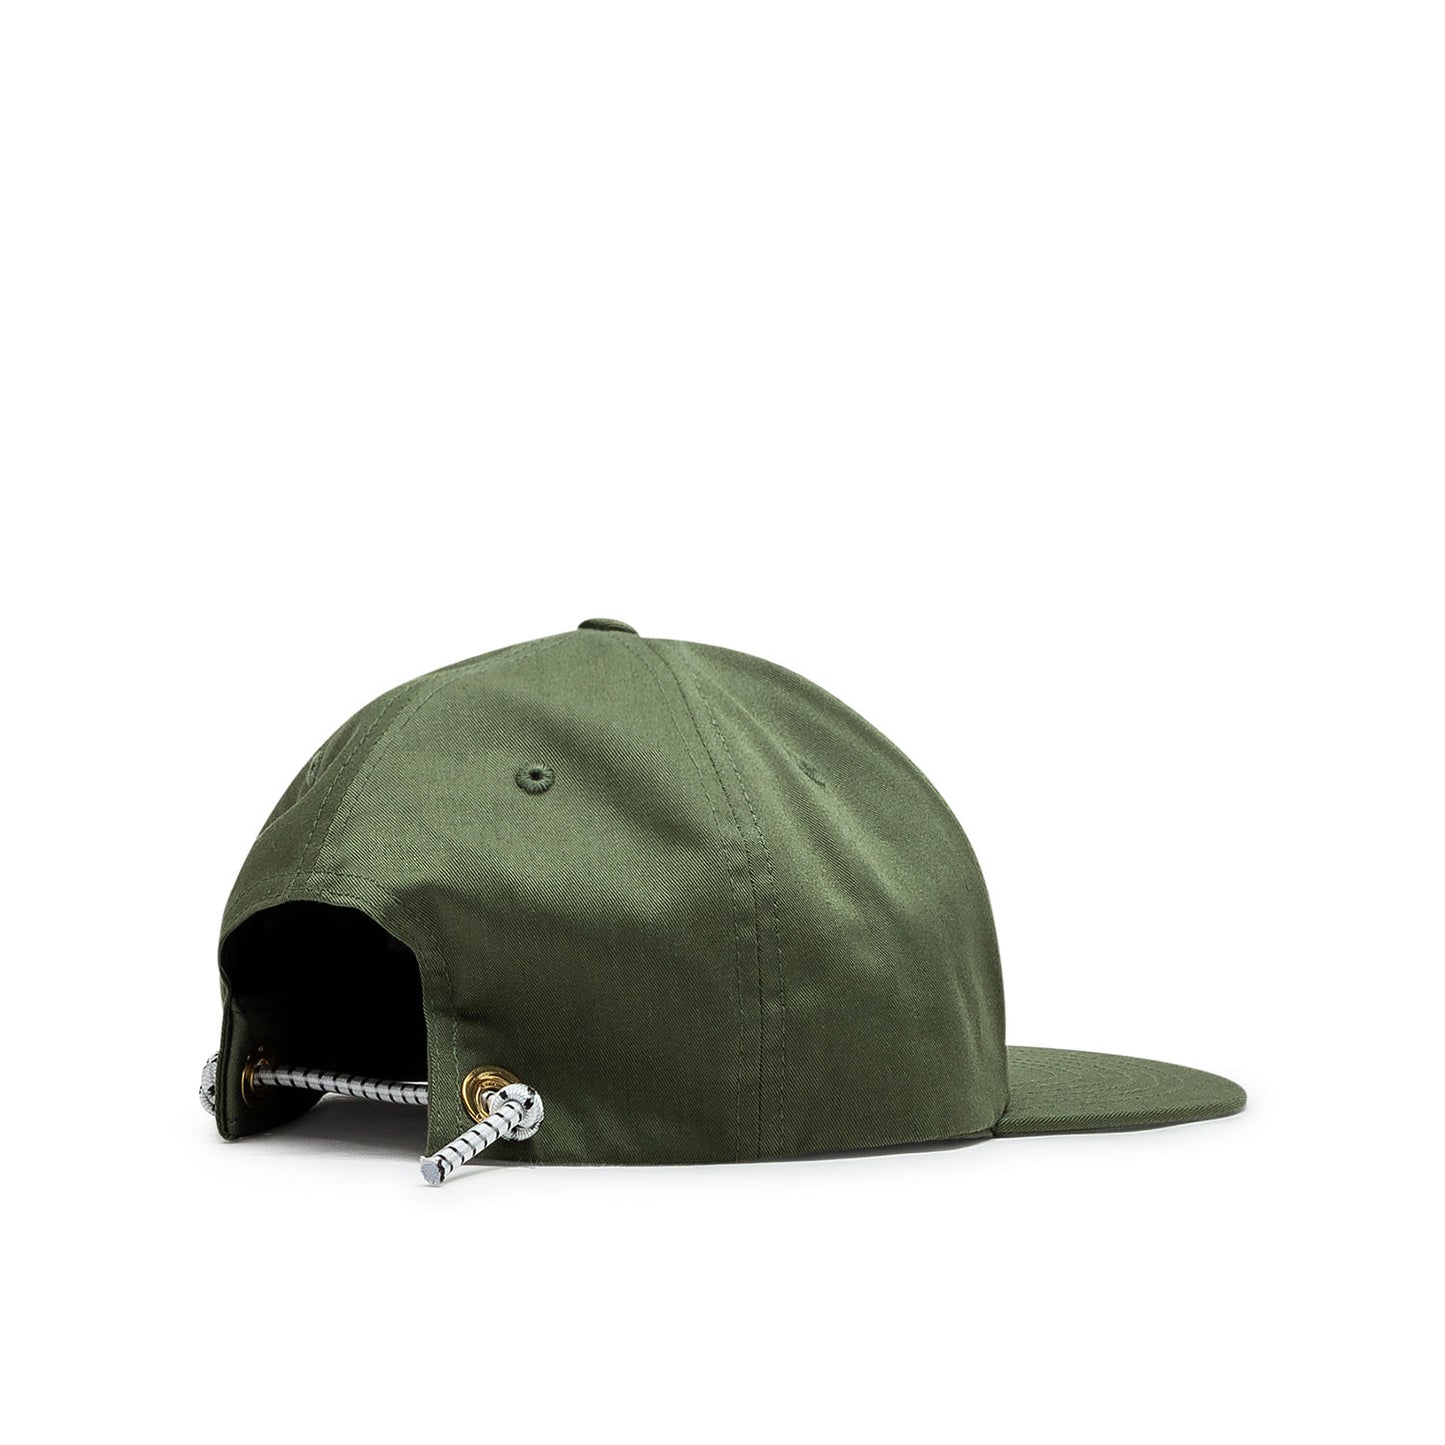 Western Hydrodynamic Research Promotional Hat (Oliv)  - Allike Store